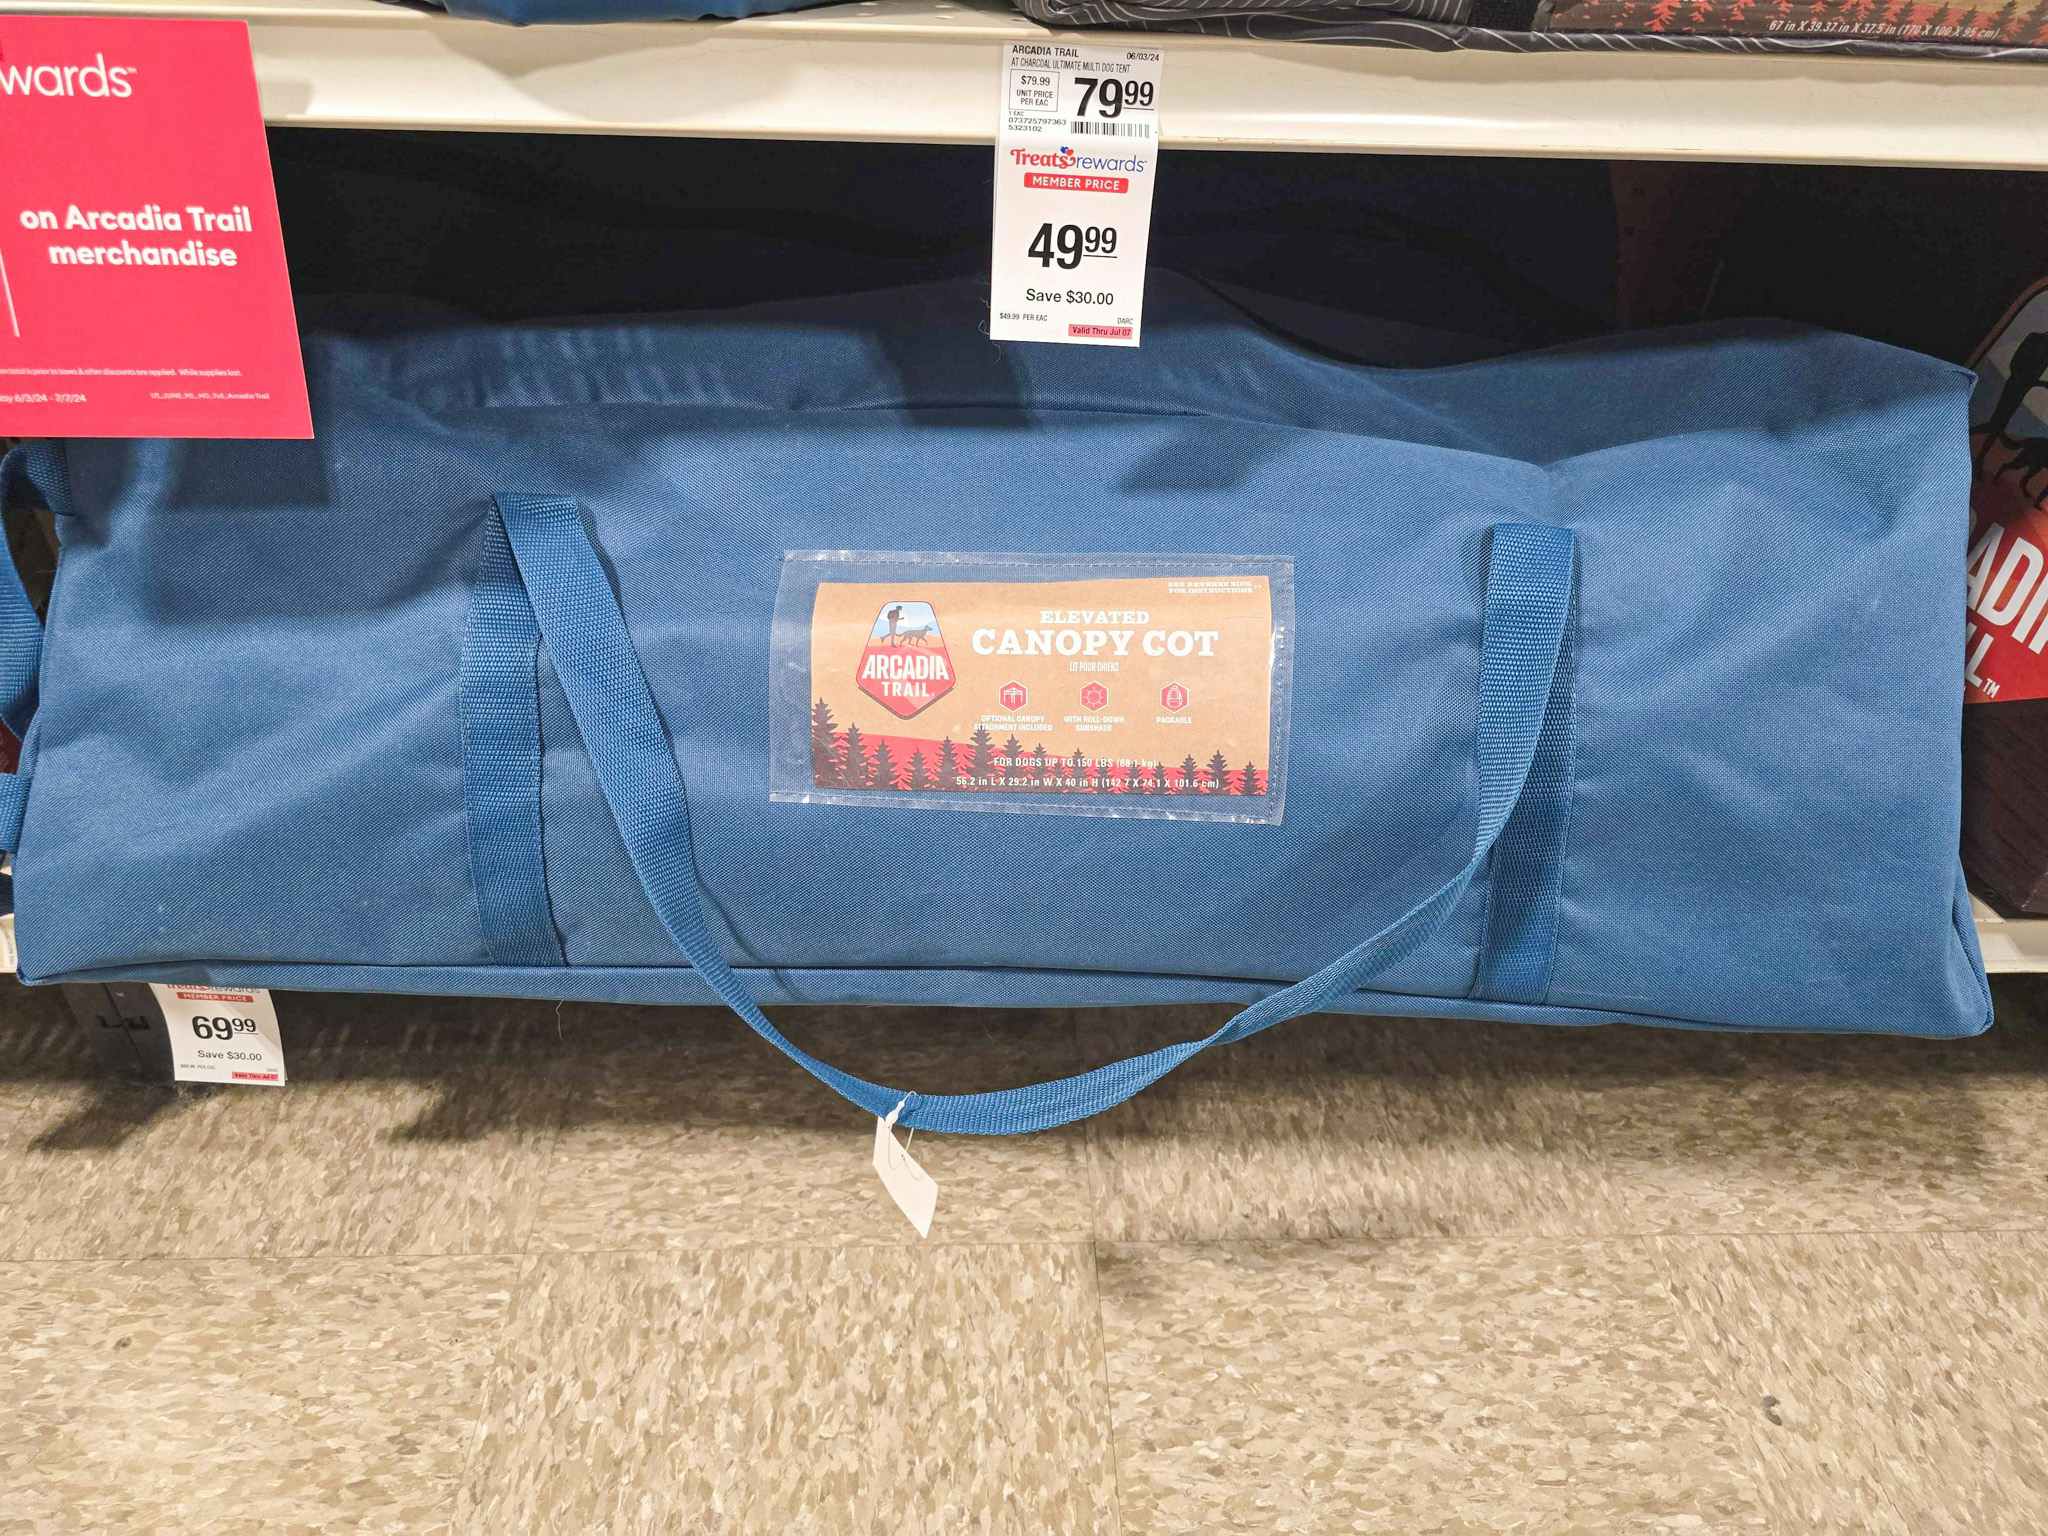 canopy cot for pets in a bag on a shelf